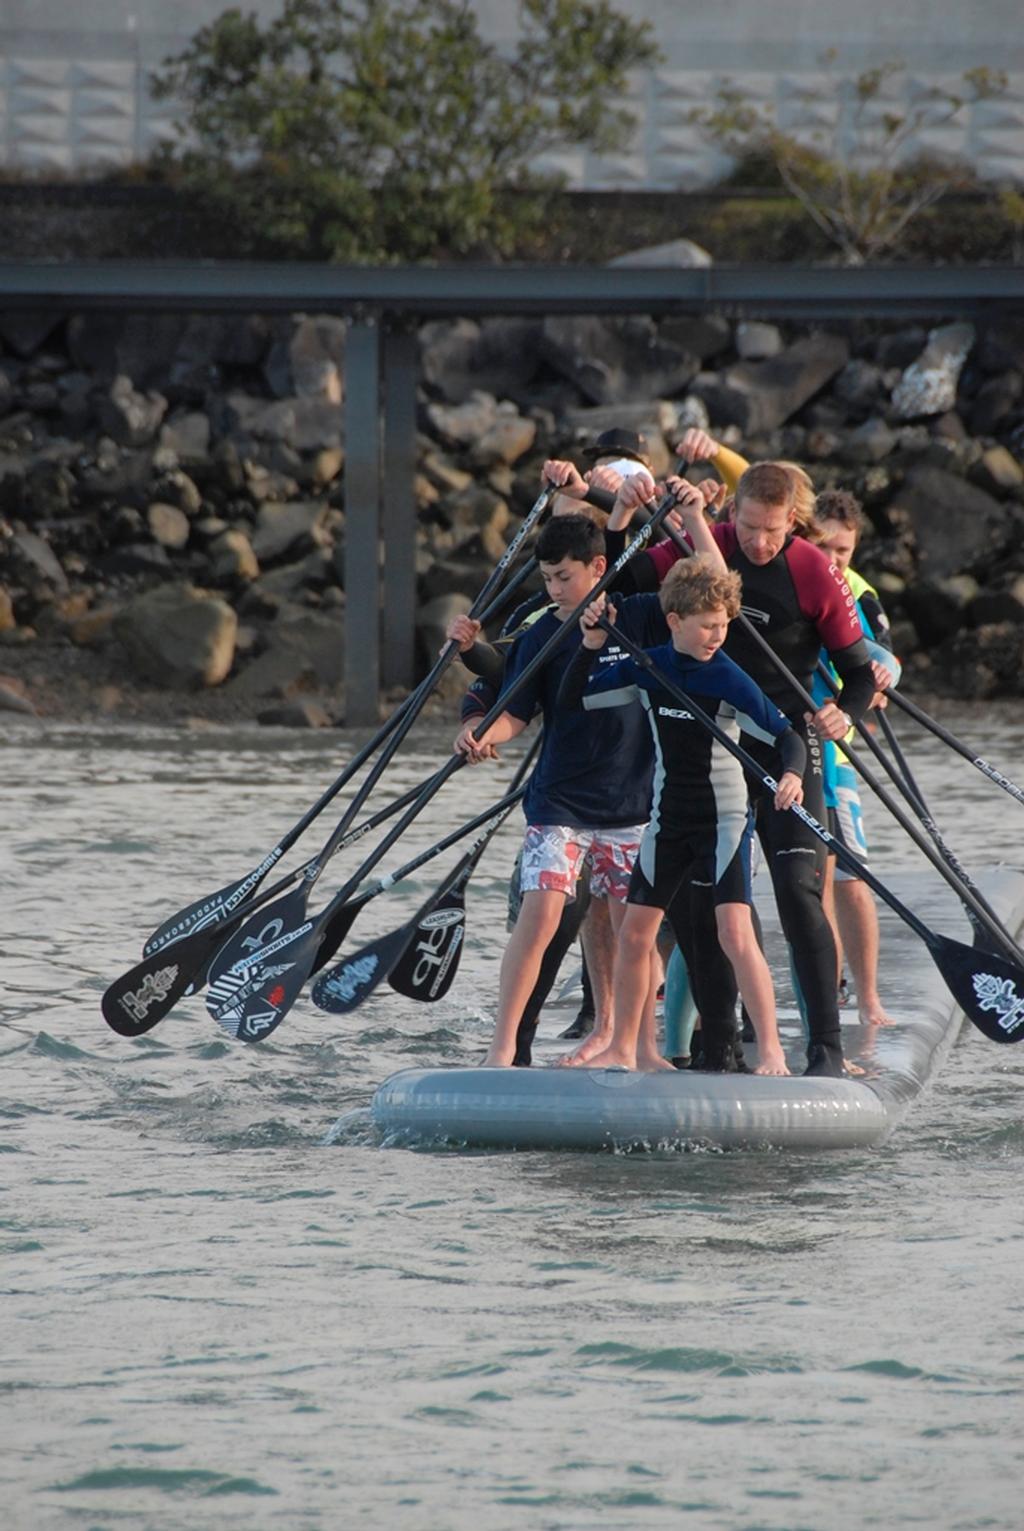 SUP practice in Westhaven - Practice Session for Guinness World Record 'Most people on a SUP © Charles Winstone